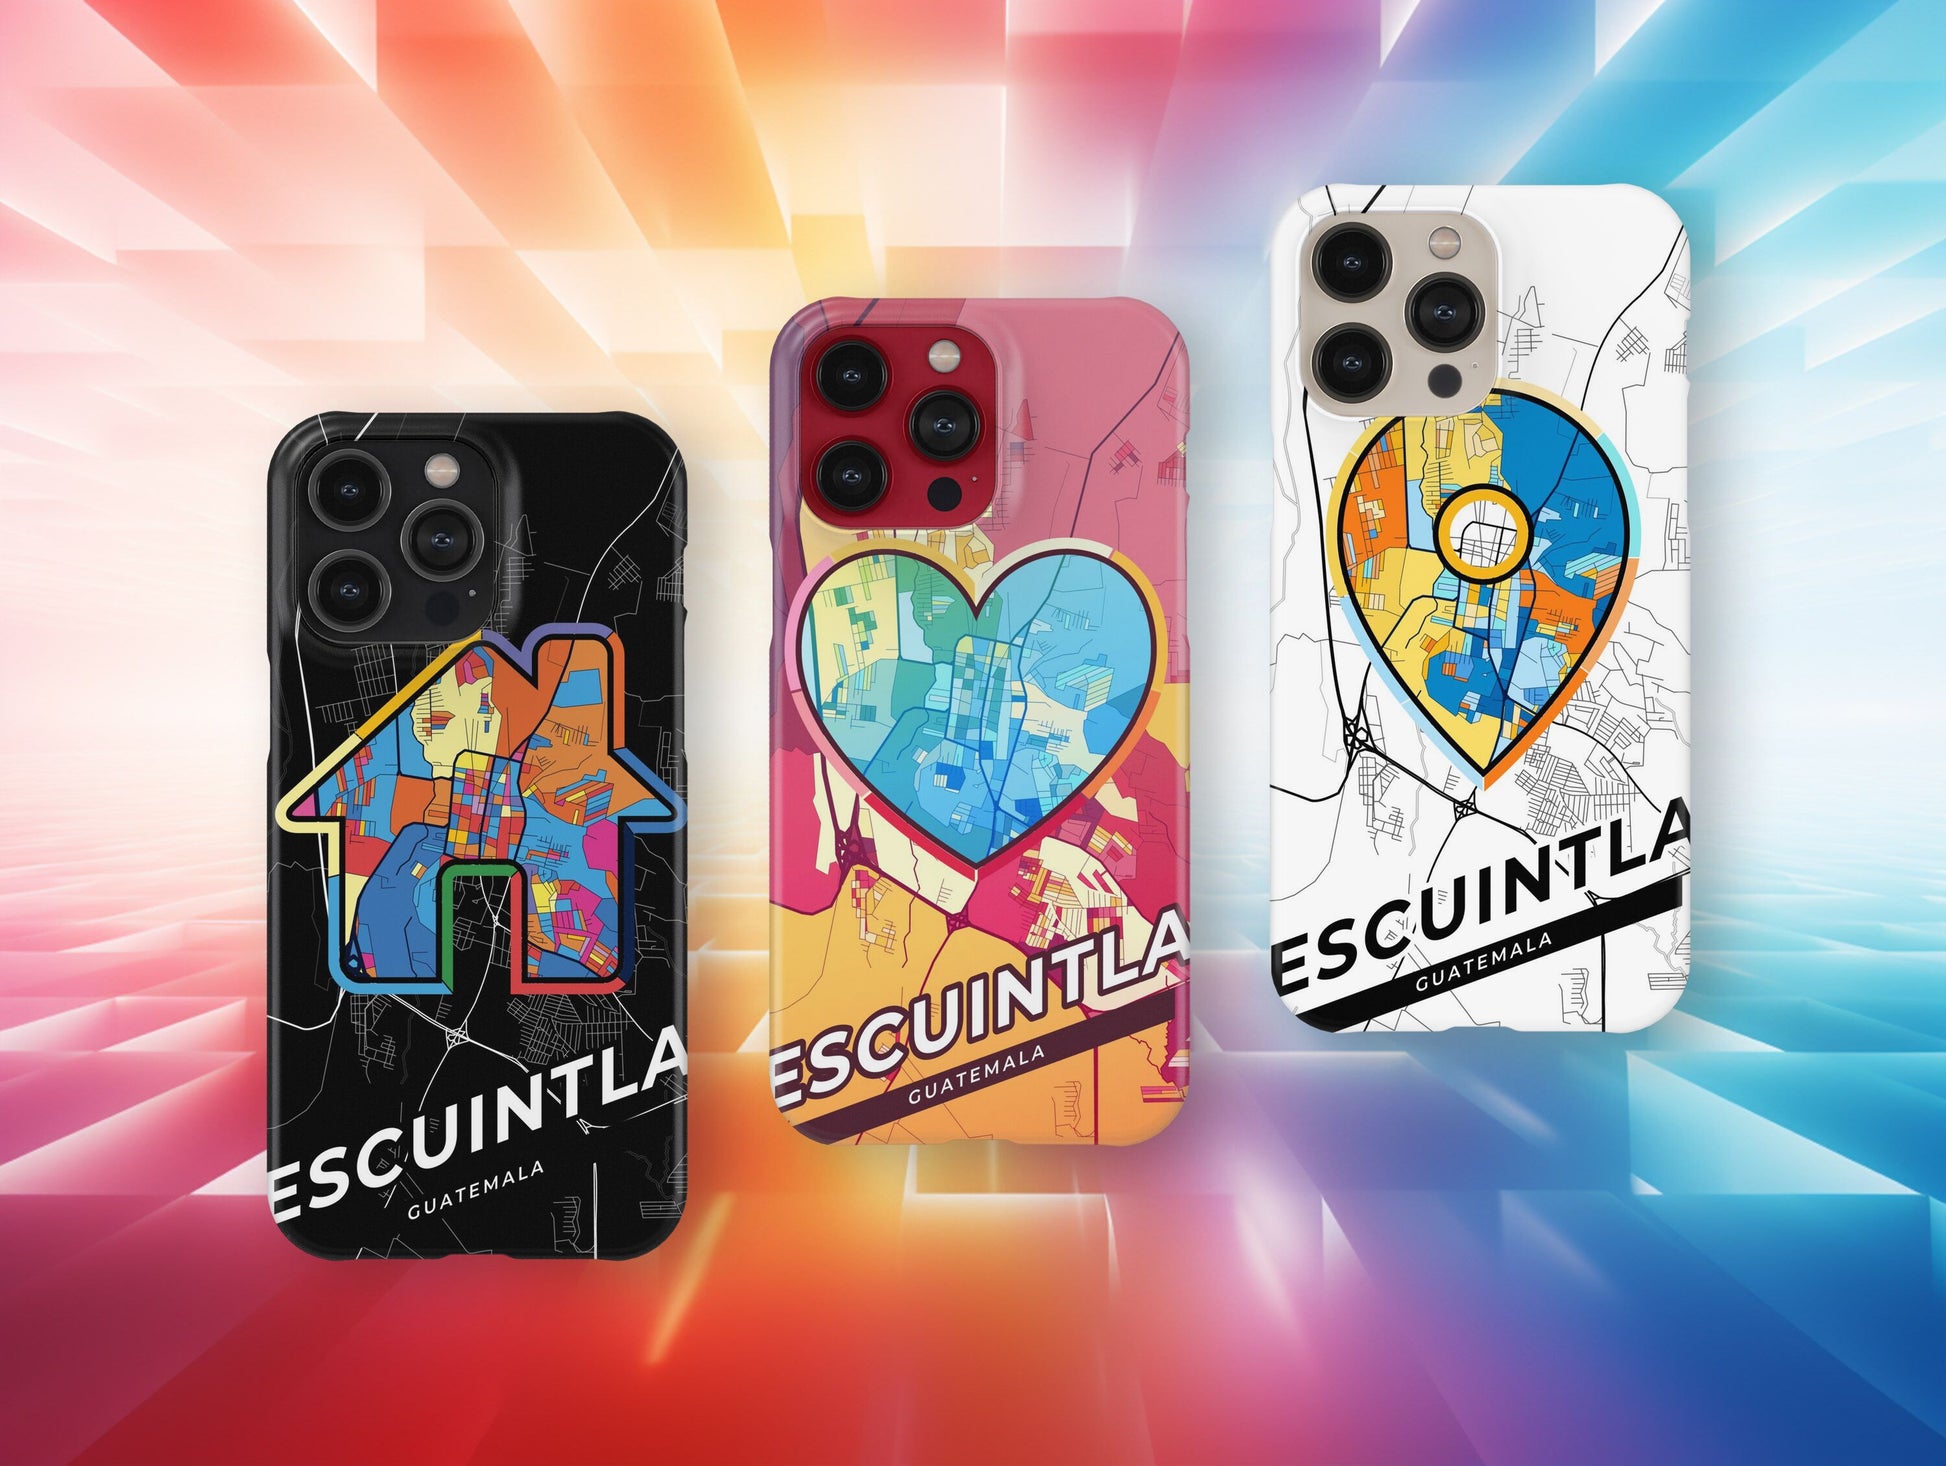 Escuintla Guatemala slim phone case with colorful icon. Birthday, wedding or housewarming gift. Couple match cases.